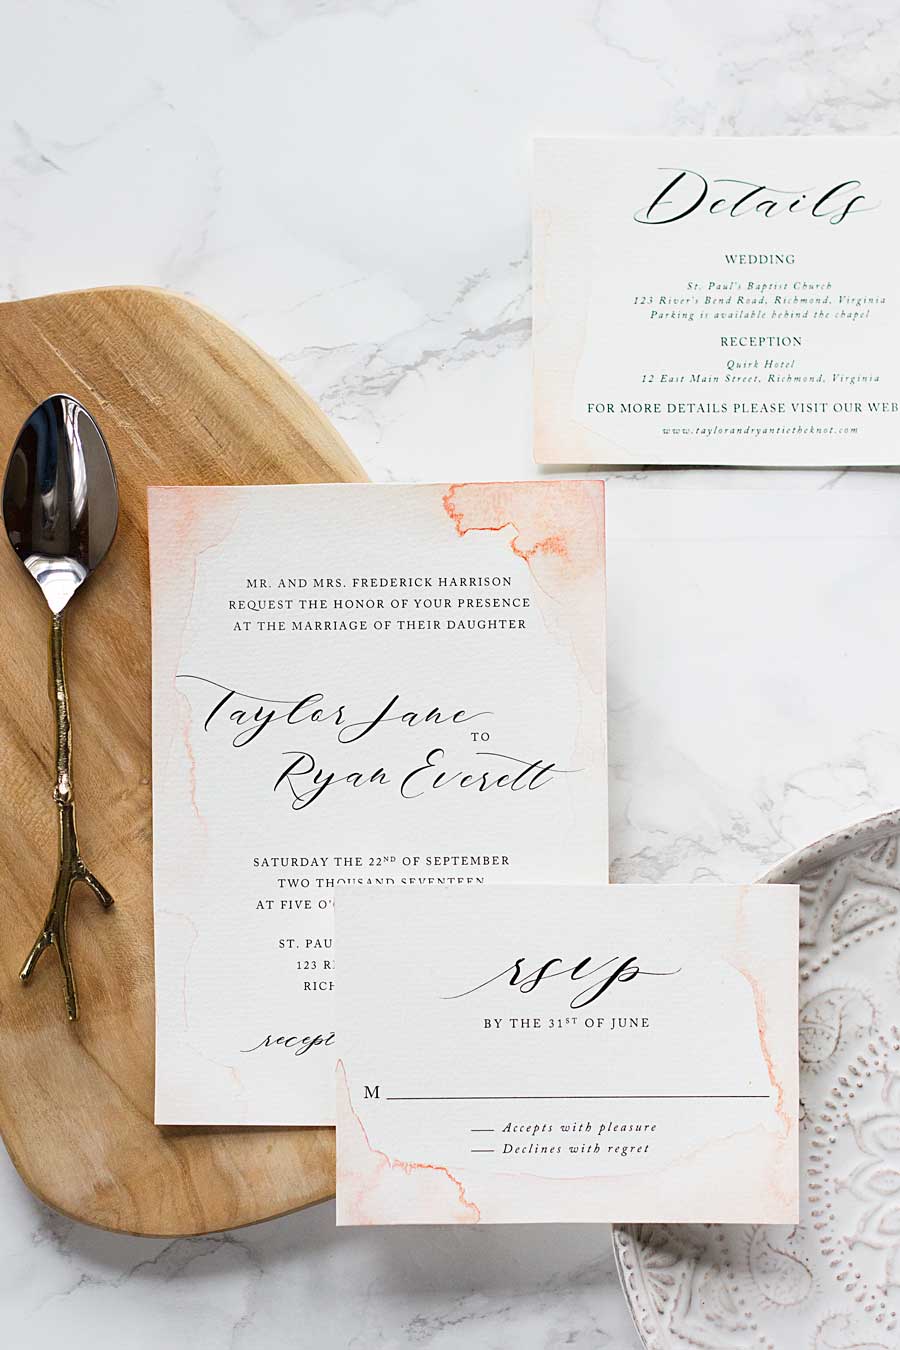 How to paint your own watercolor wedding invitations on a budget and make them look like a million bucks